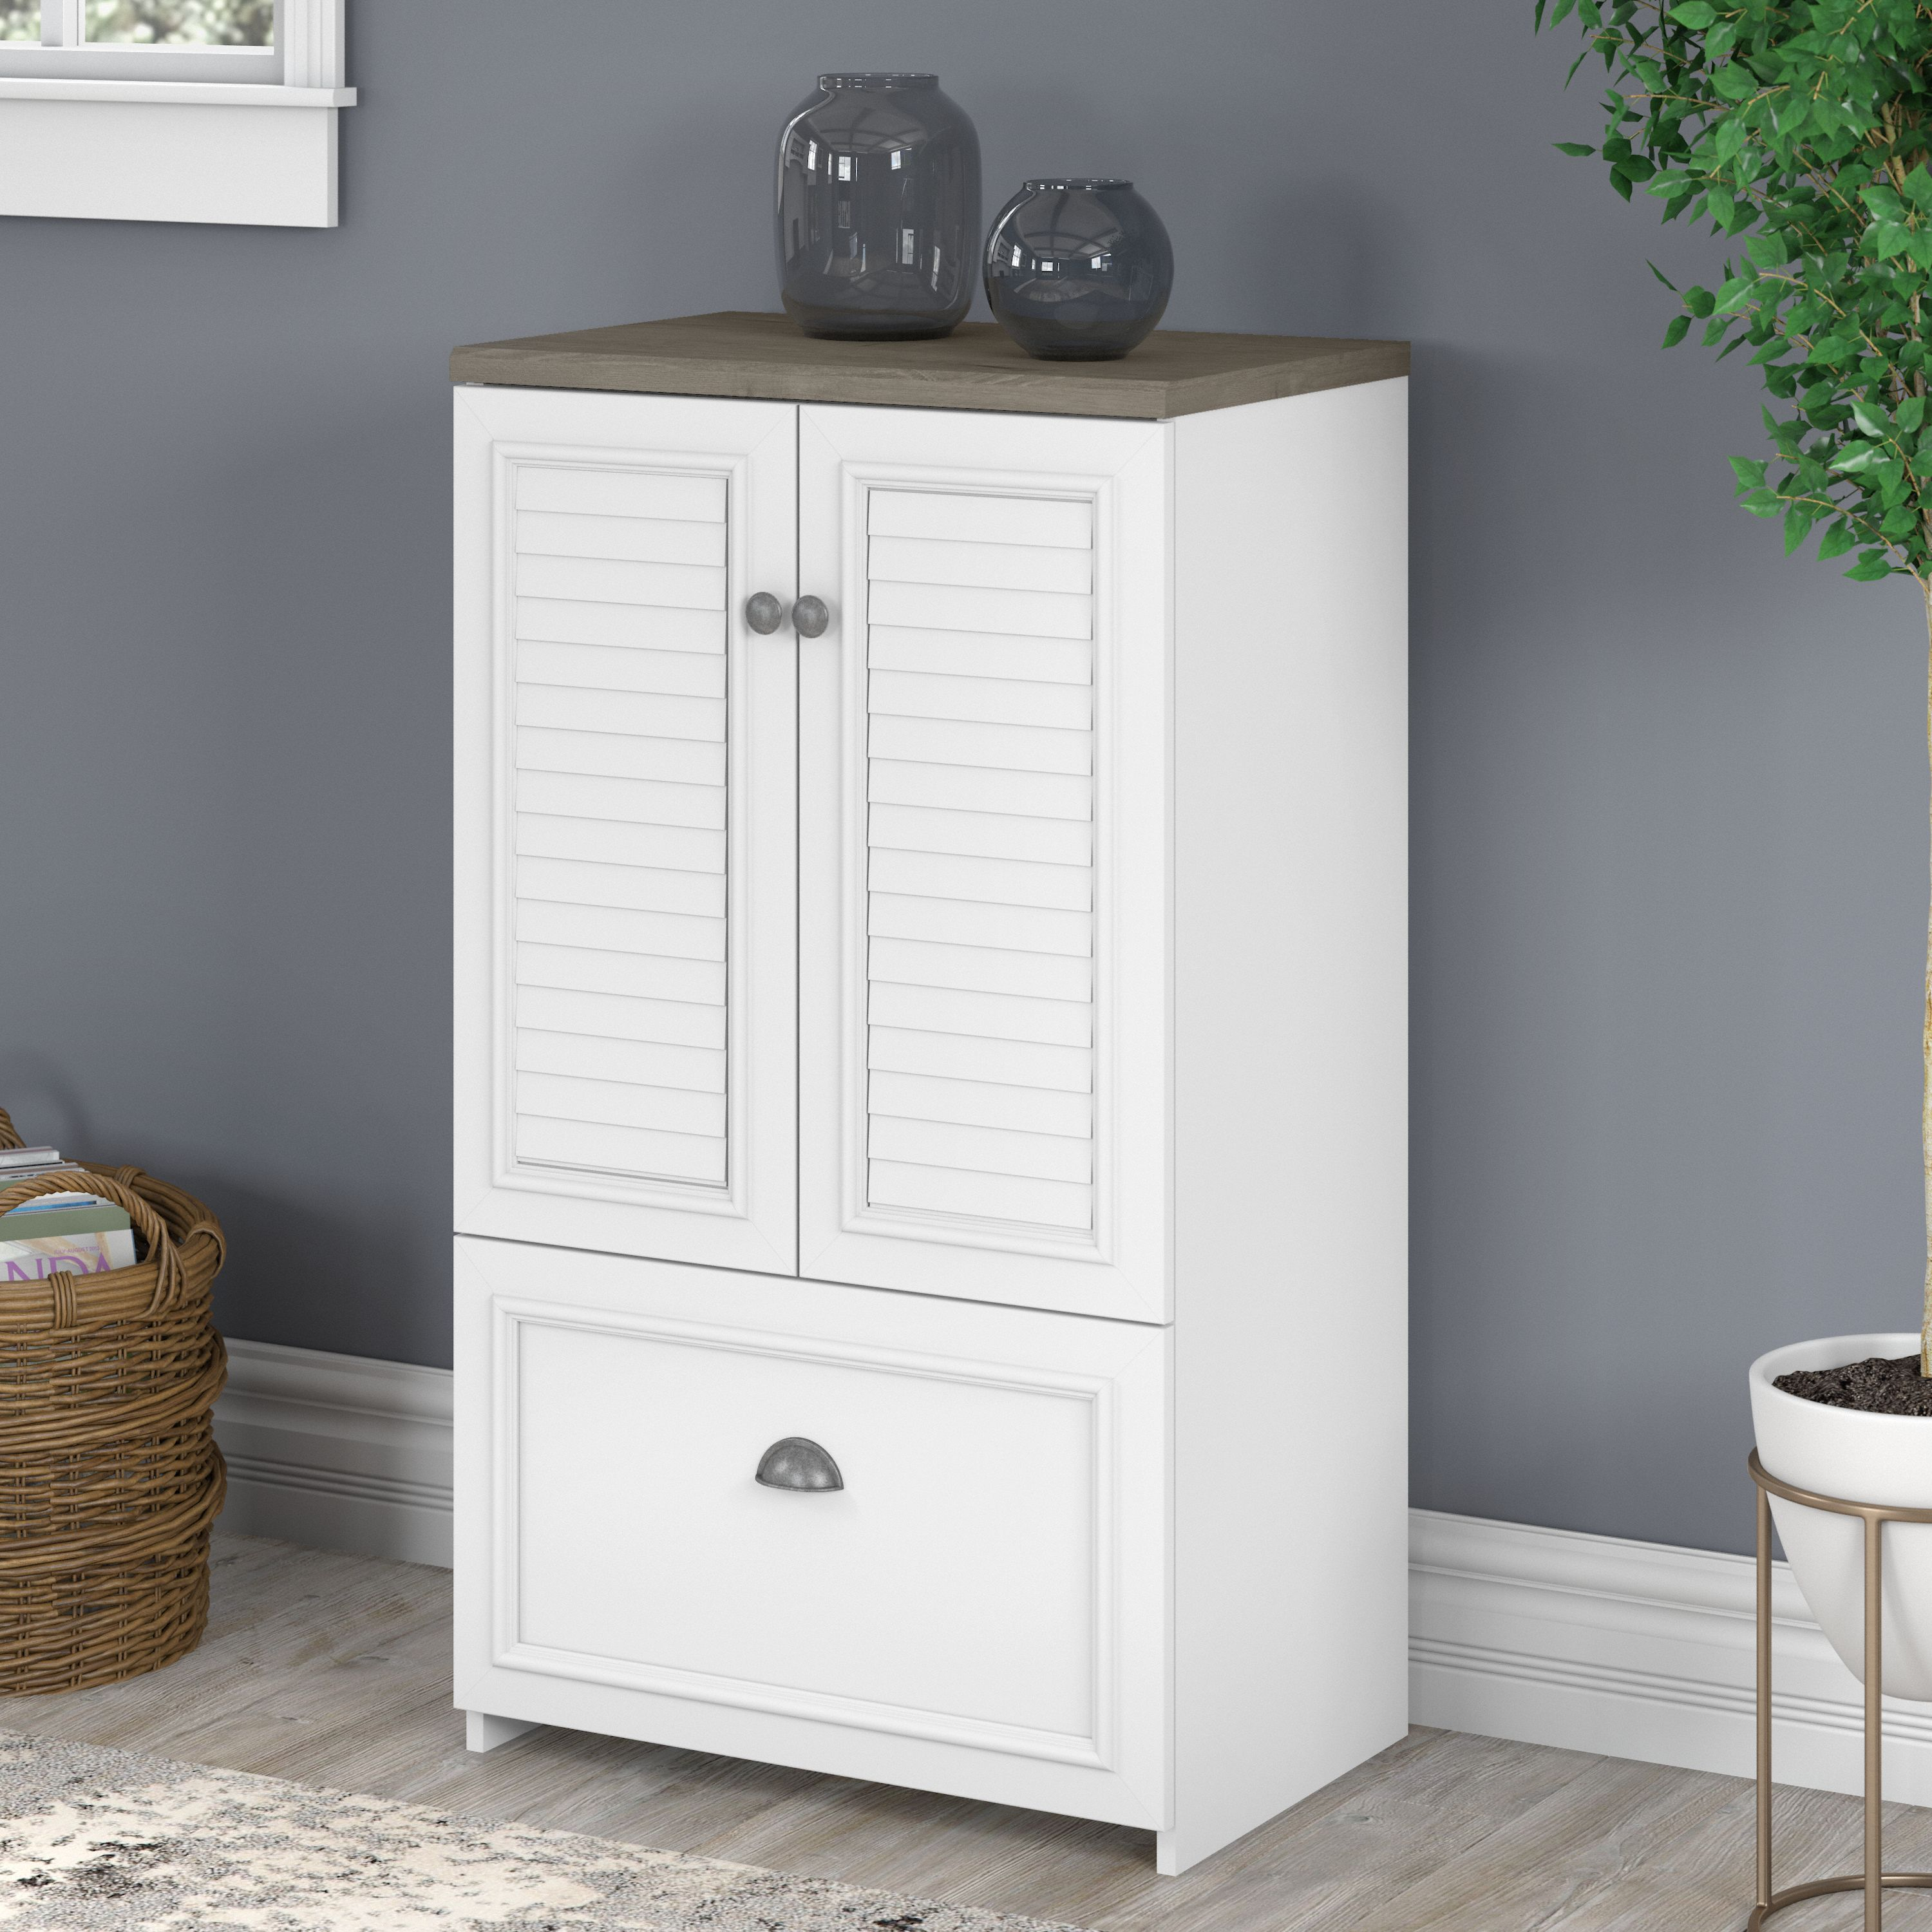 Shop Bush Furniture Fairview 2 Door Storage Cabinet with File Drawer 01 WC53680-03 #color_shiplap gray/pure white